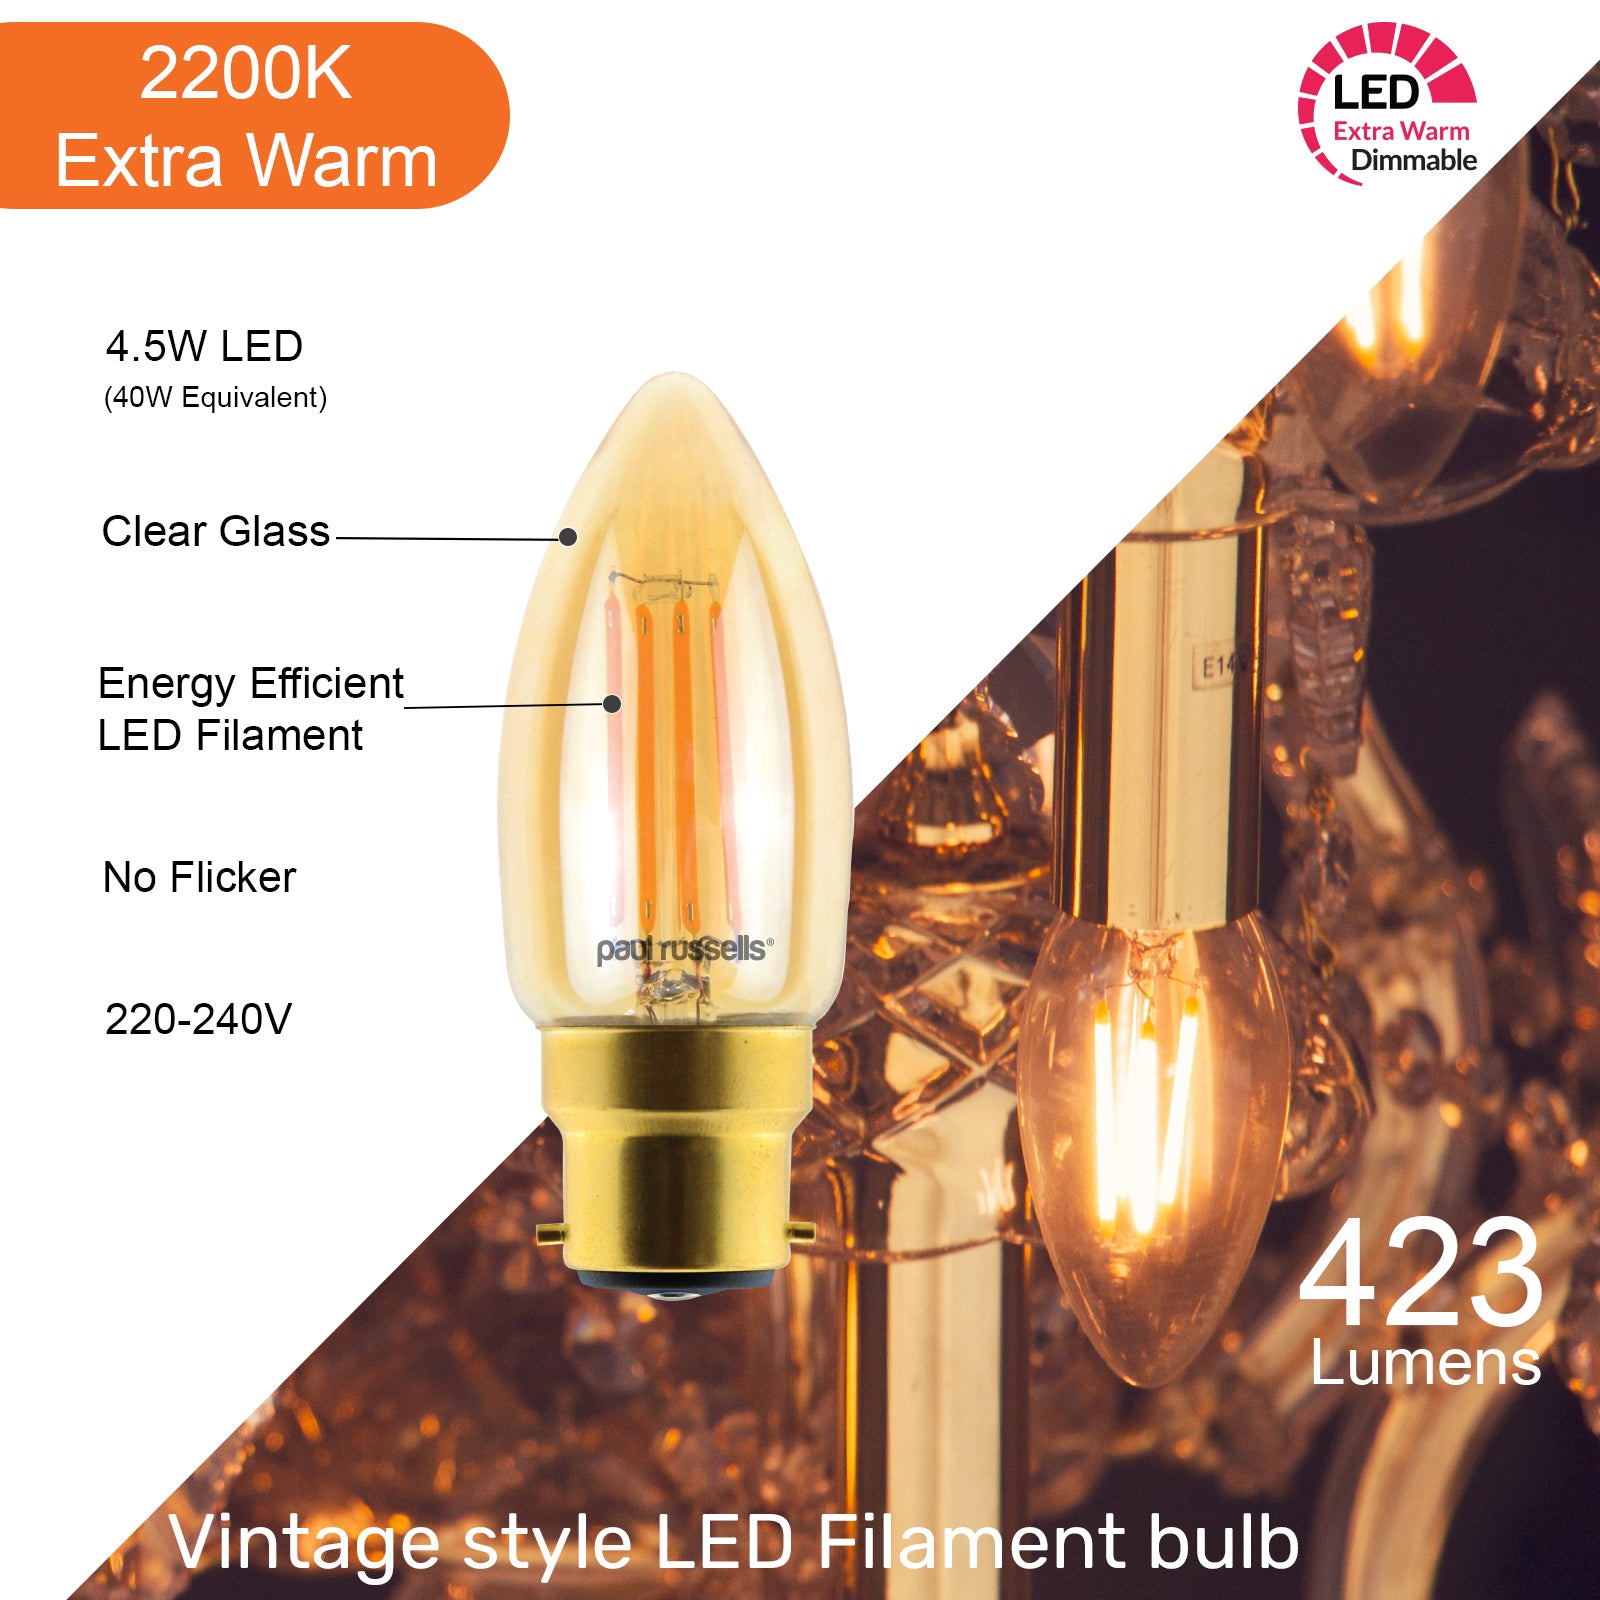 LED Dimmable Filament Candle 4.5W (40w), BC/B22, 423 Lumens, Extra Warm White(2200K), 240V